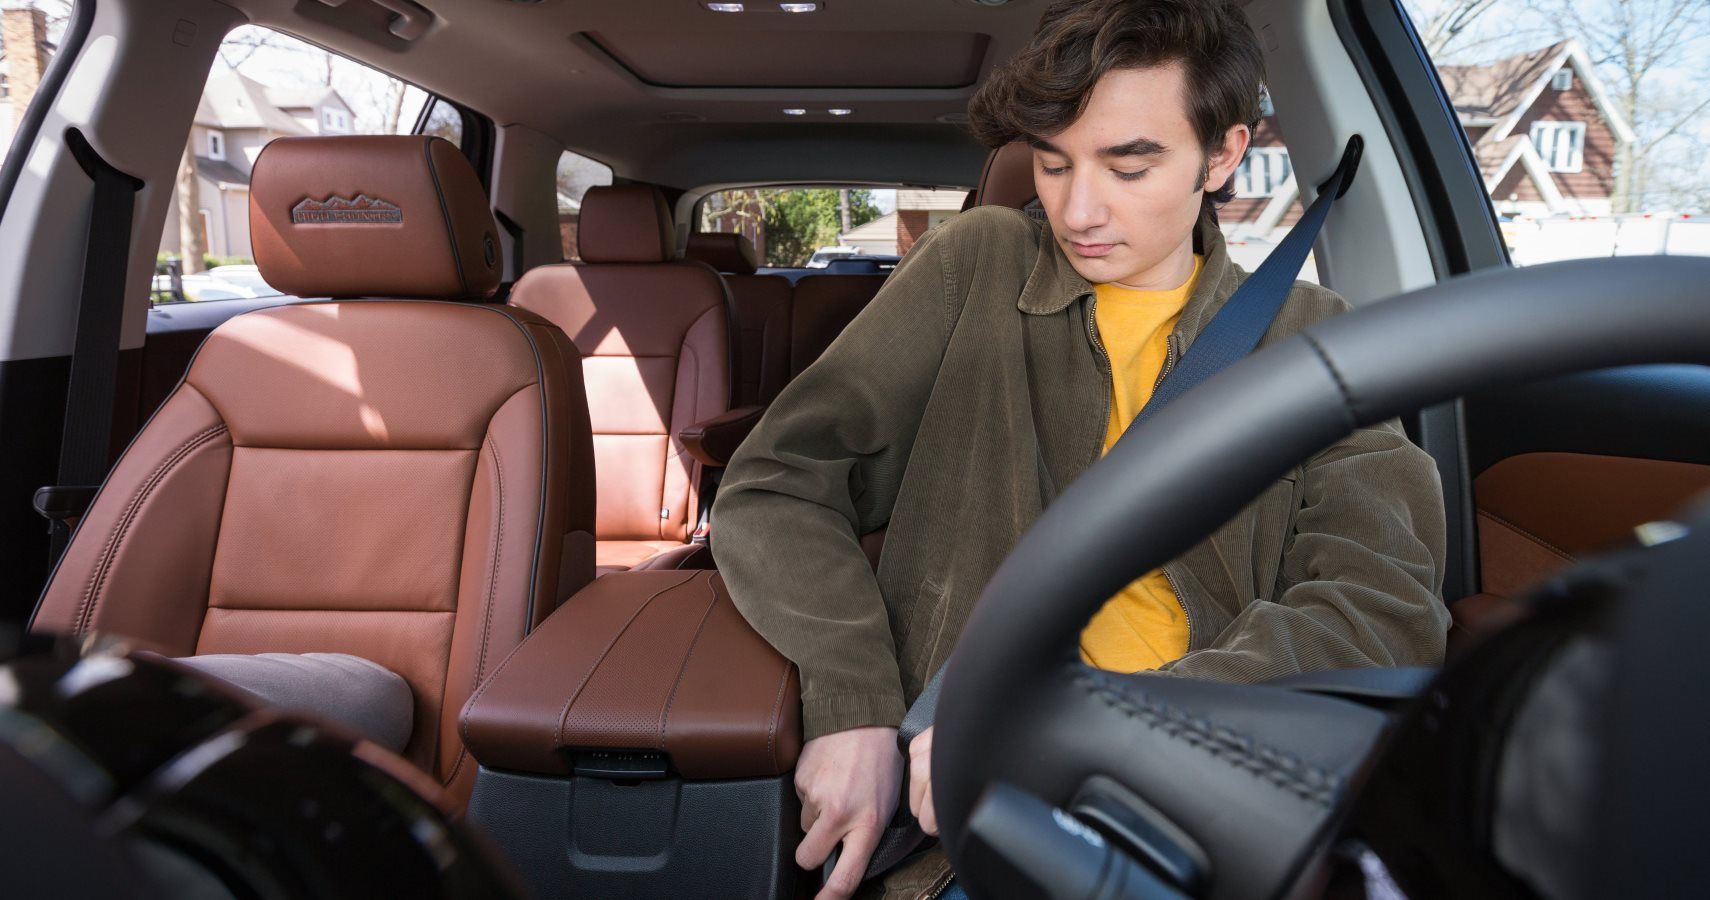 Chevrolet's new industry-first Buckle to Drive feature, embedded in Teen Driver mode, is the latest feature designed to encourage young drivers to develop safe driving habits right from the start. (Photo by John F. Martin for Chevrolet)